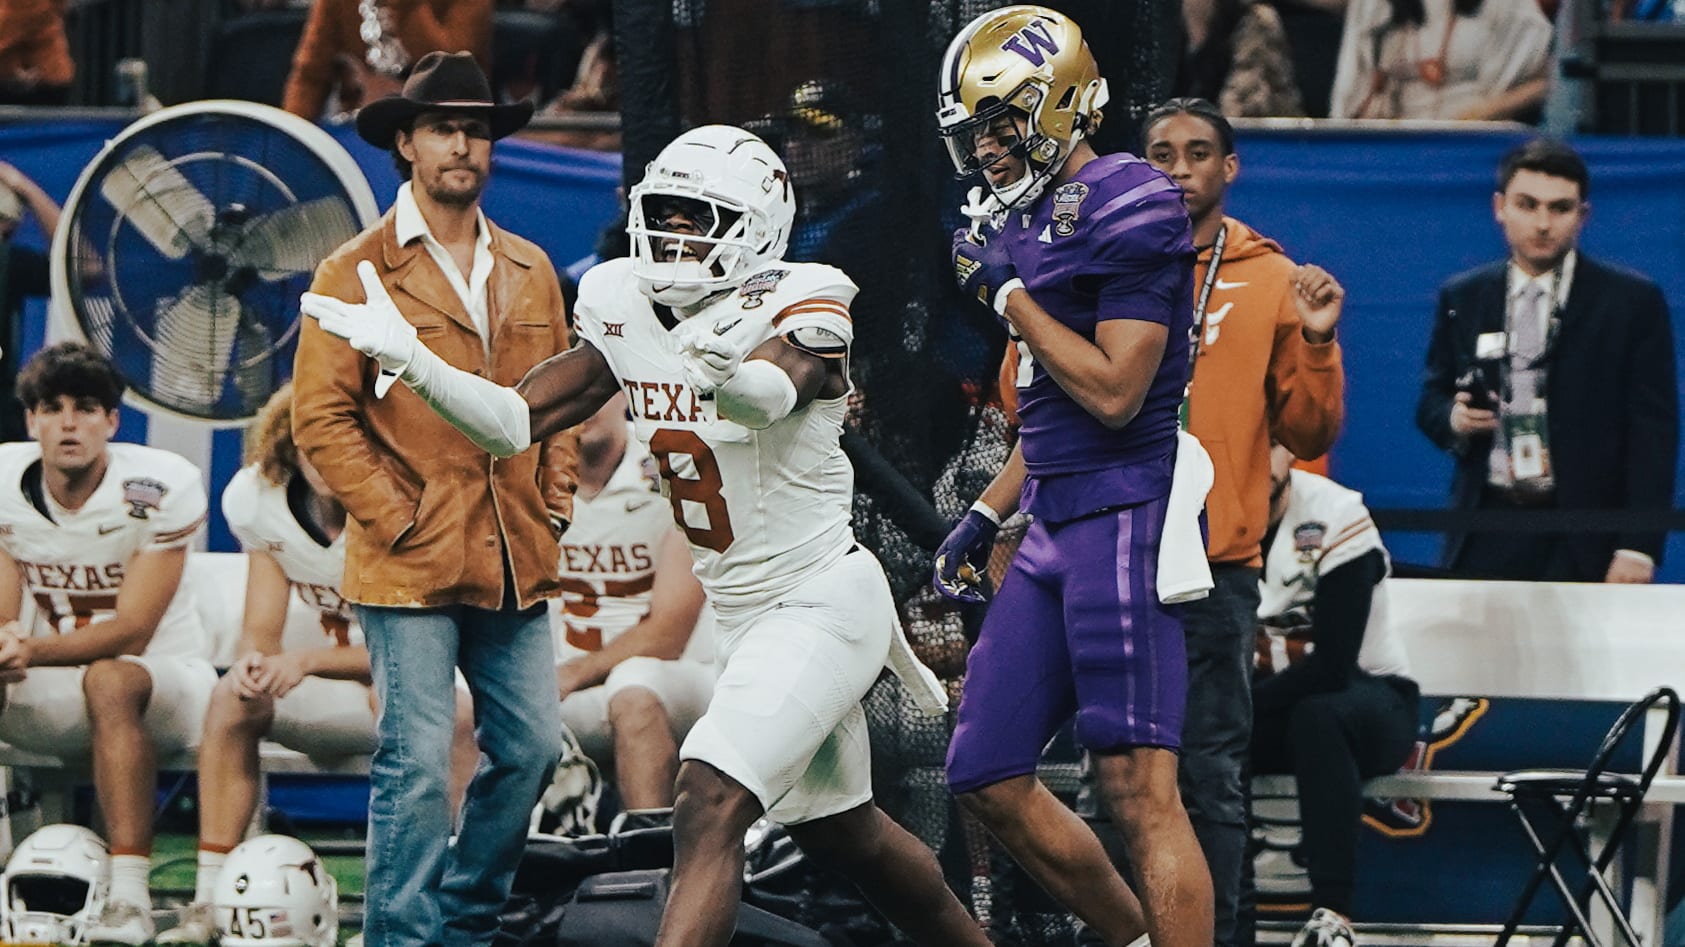 University of Washington Football’s Texas Disconnect: New Coach Jedd Fisch and Past Player Legacy